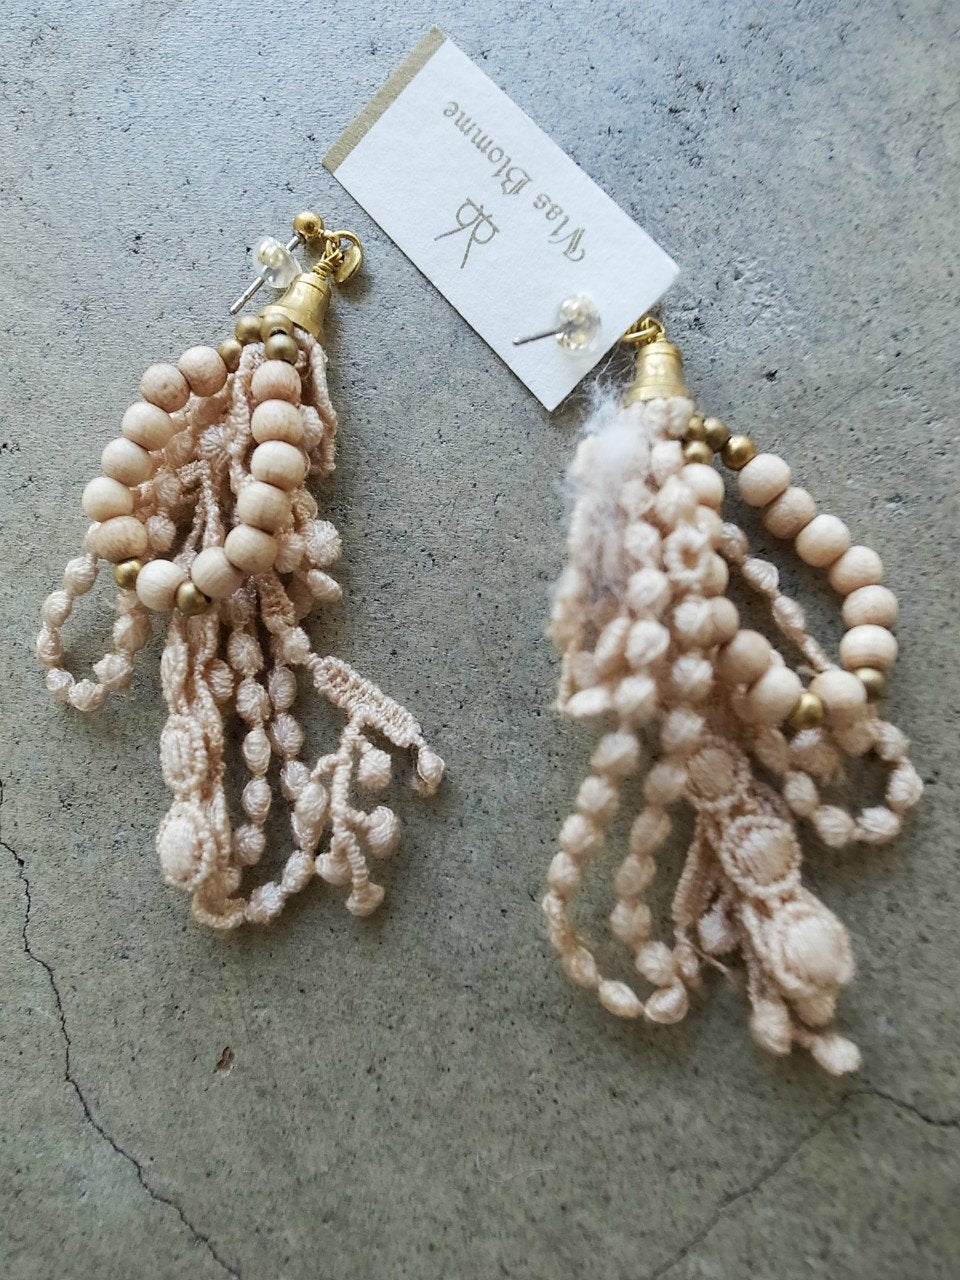 Anne number of OMEKASHI 23 Botanical Dyed Lace Earrings & Ear clips by Vlas Blomme/shfy